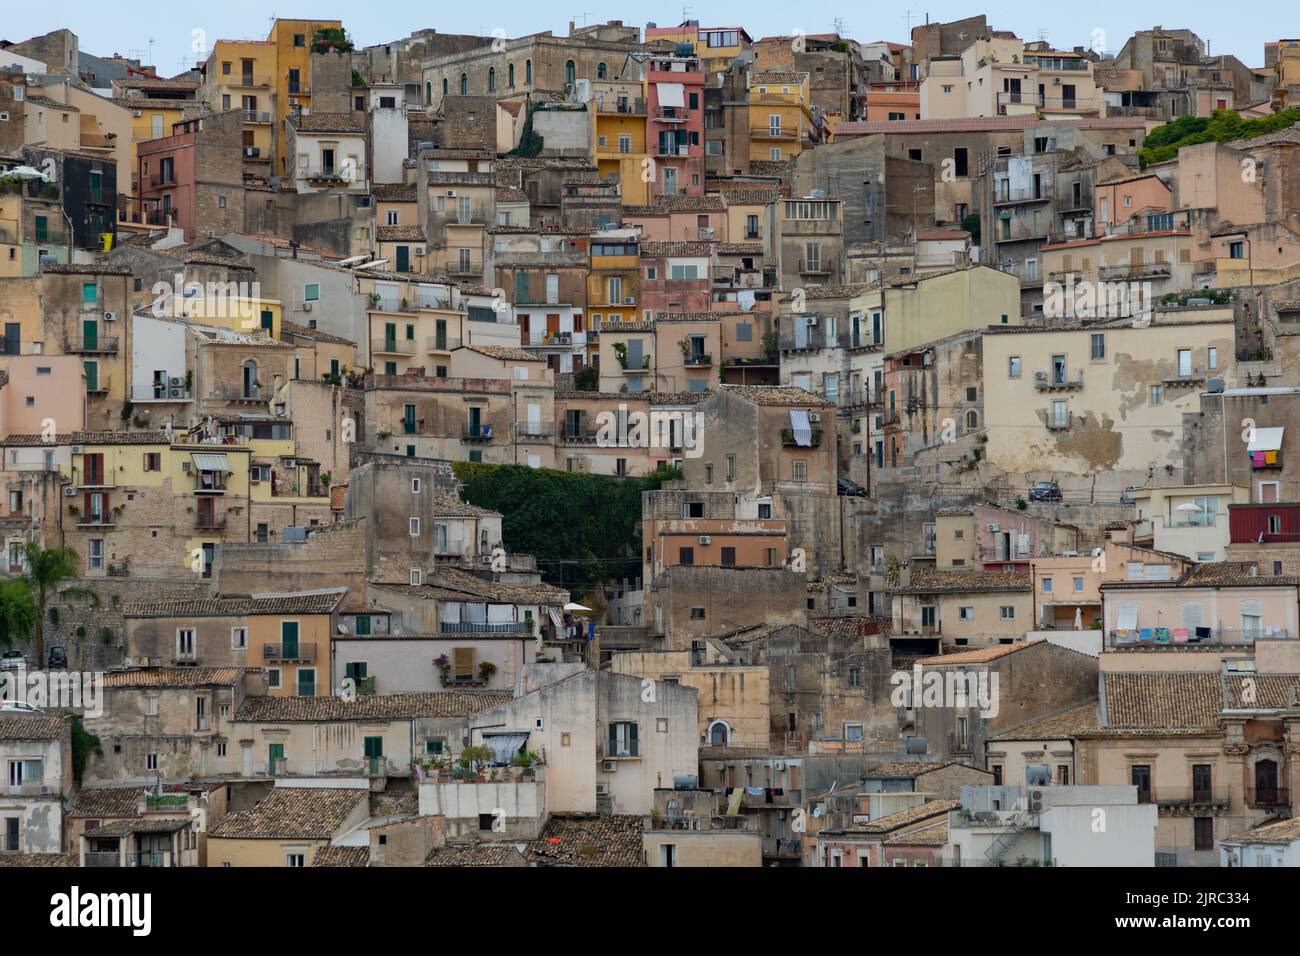 A view of the Sicilian hilltop town of Ragusa, highlighting the historic centre of Ragusa Ibla. Stock Photo